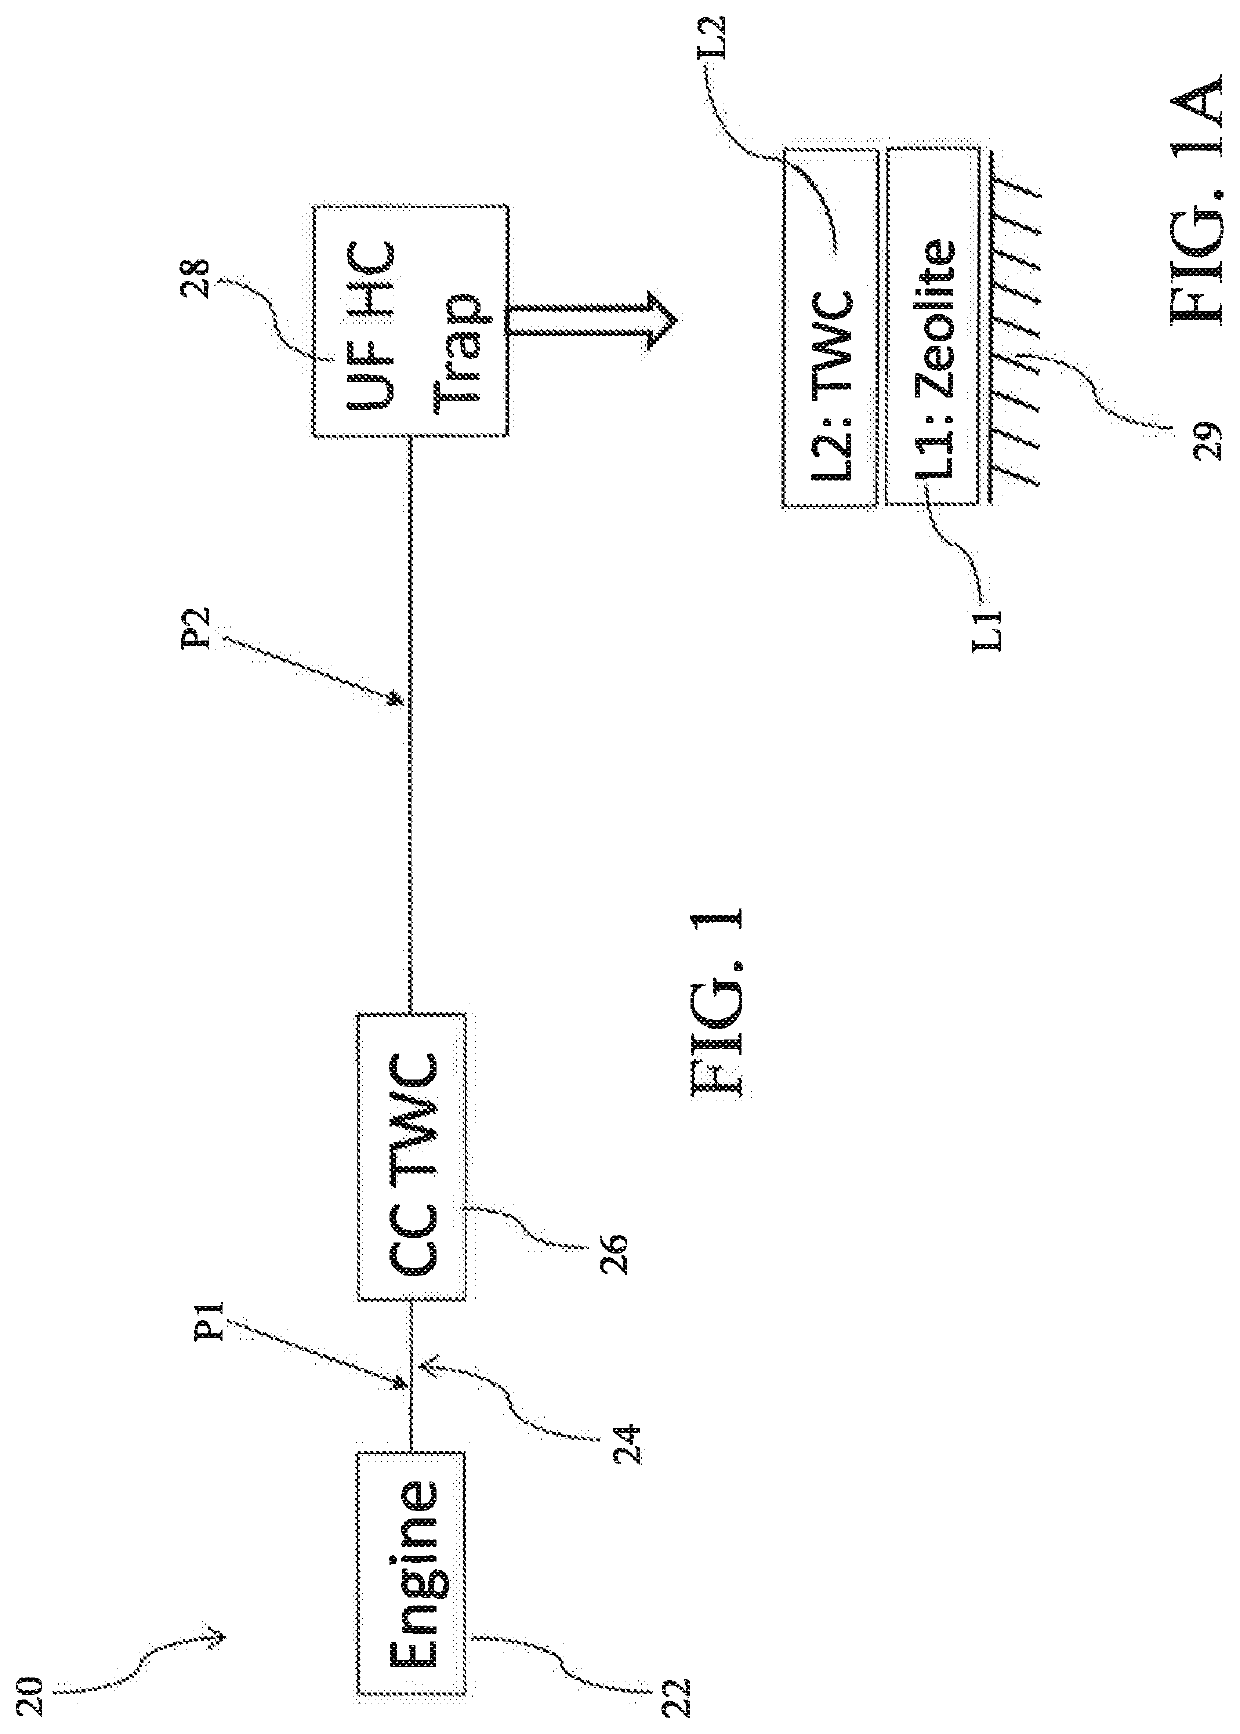 Exhaust treatment systems and methods involving oxygen supplementation and hydrocarbon trapping